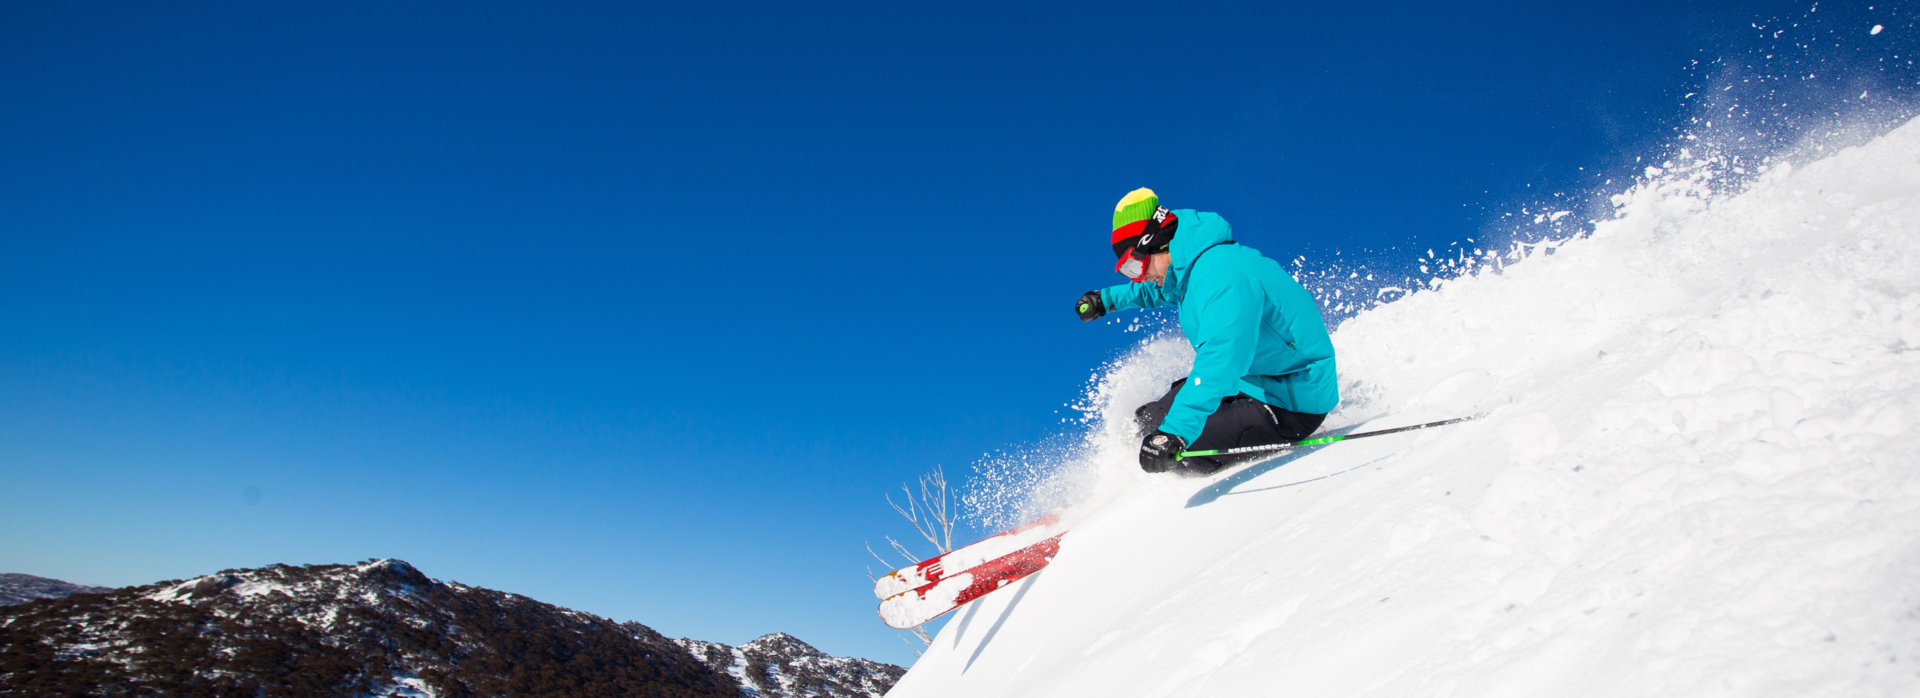 Top Ski Destinations in the Southern Hemisphere